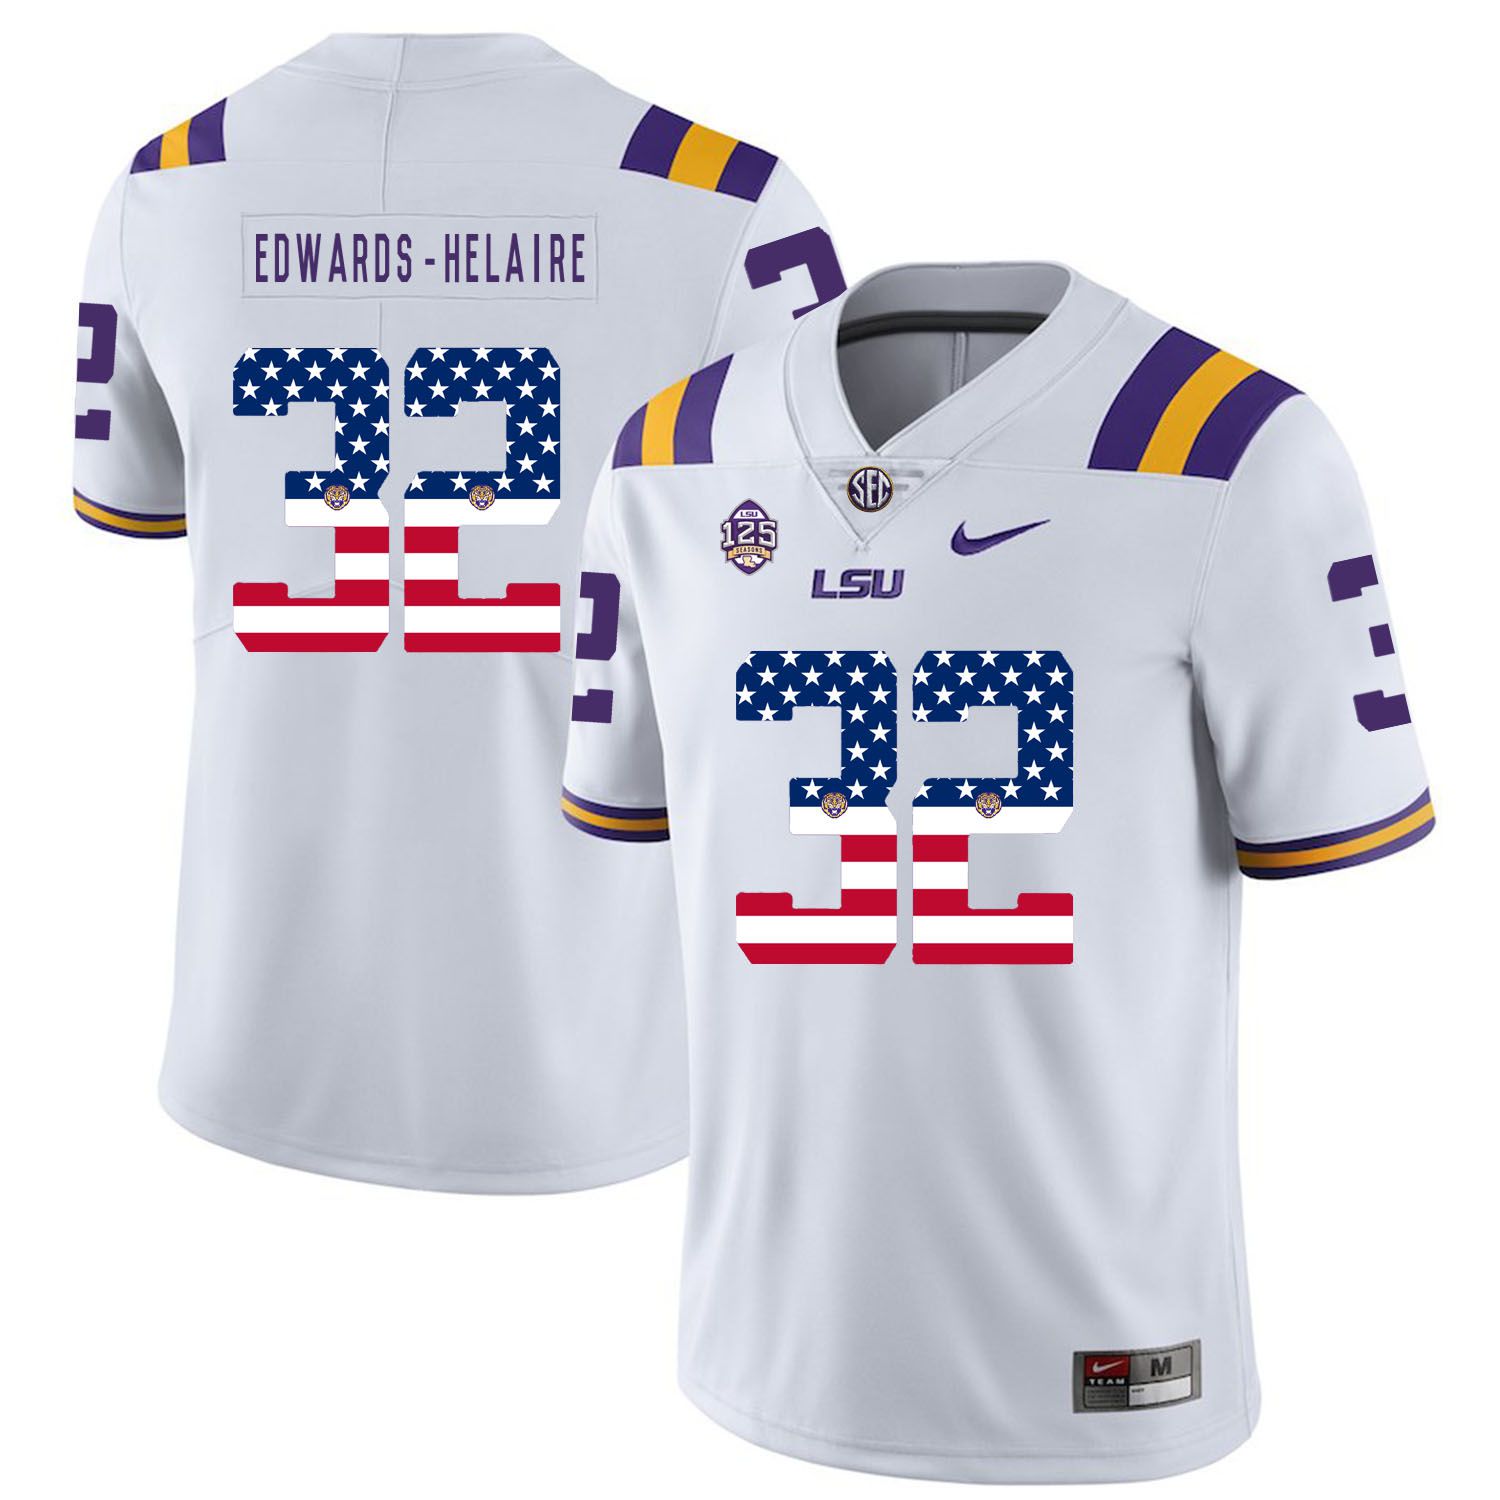 Men LSU Tigers 32 Edwards-helaire White Flag Customized NCAA Jerseys